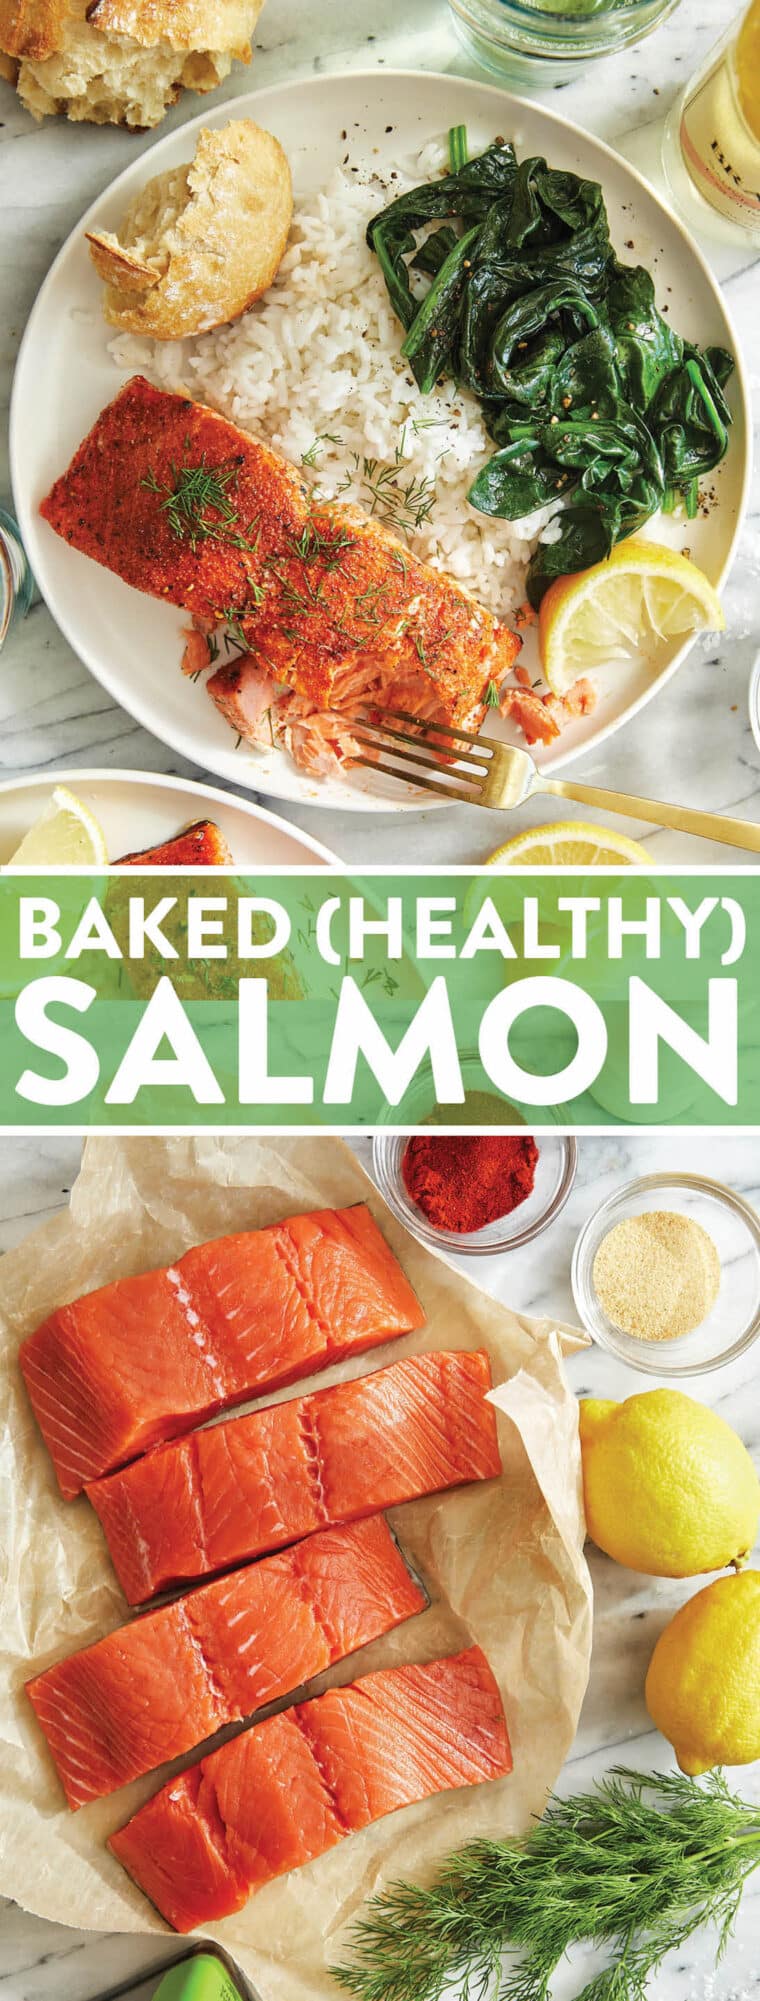 Baked (Healthy) Salmon - With a simple and oh-so-flavorful spice rub, this comes together so fast in just 30 min! Quick, healthy and so easy!